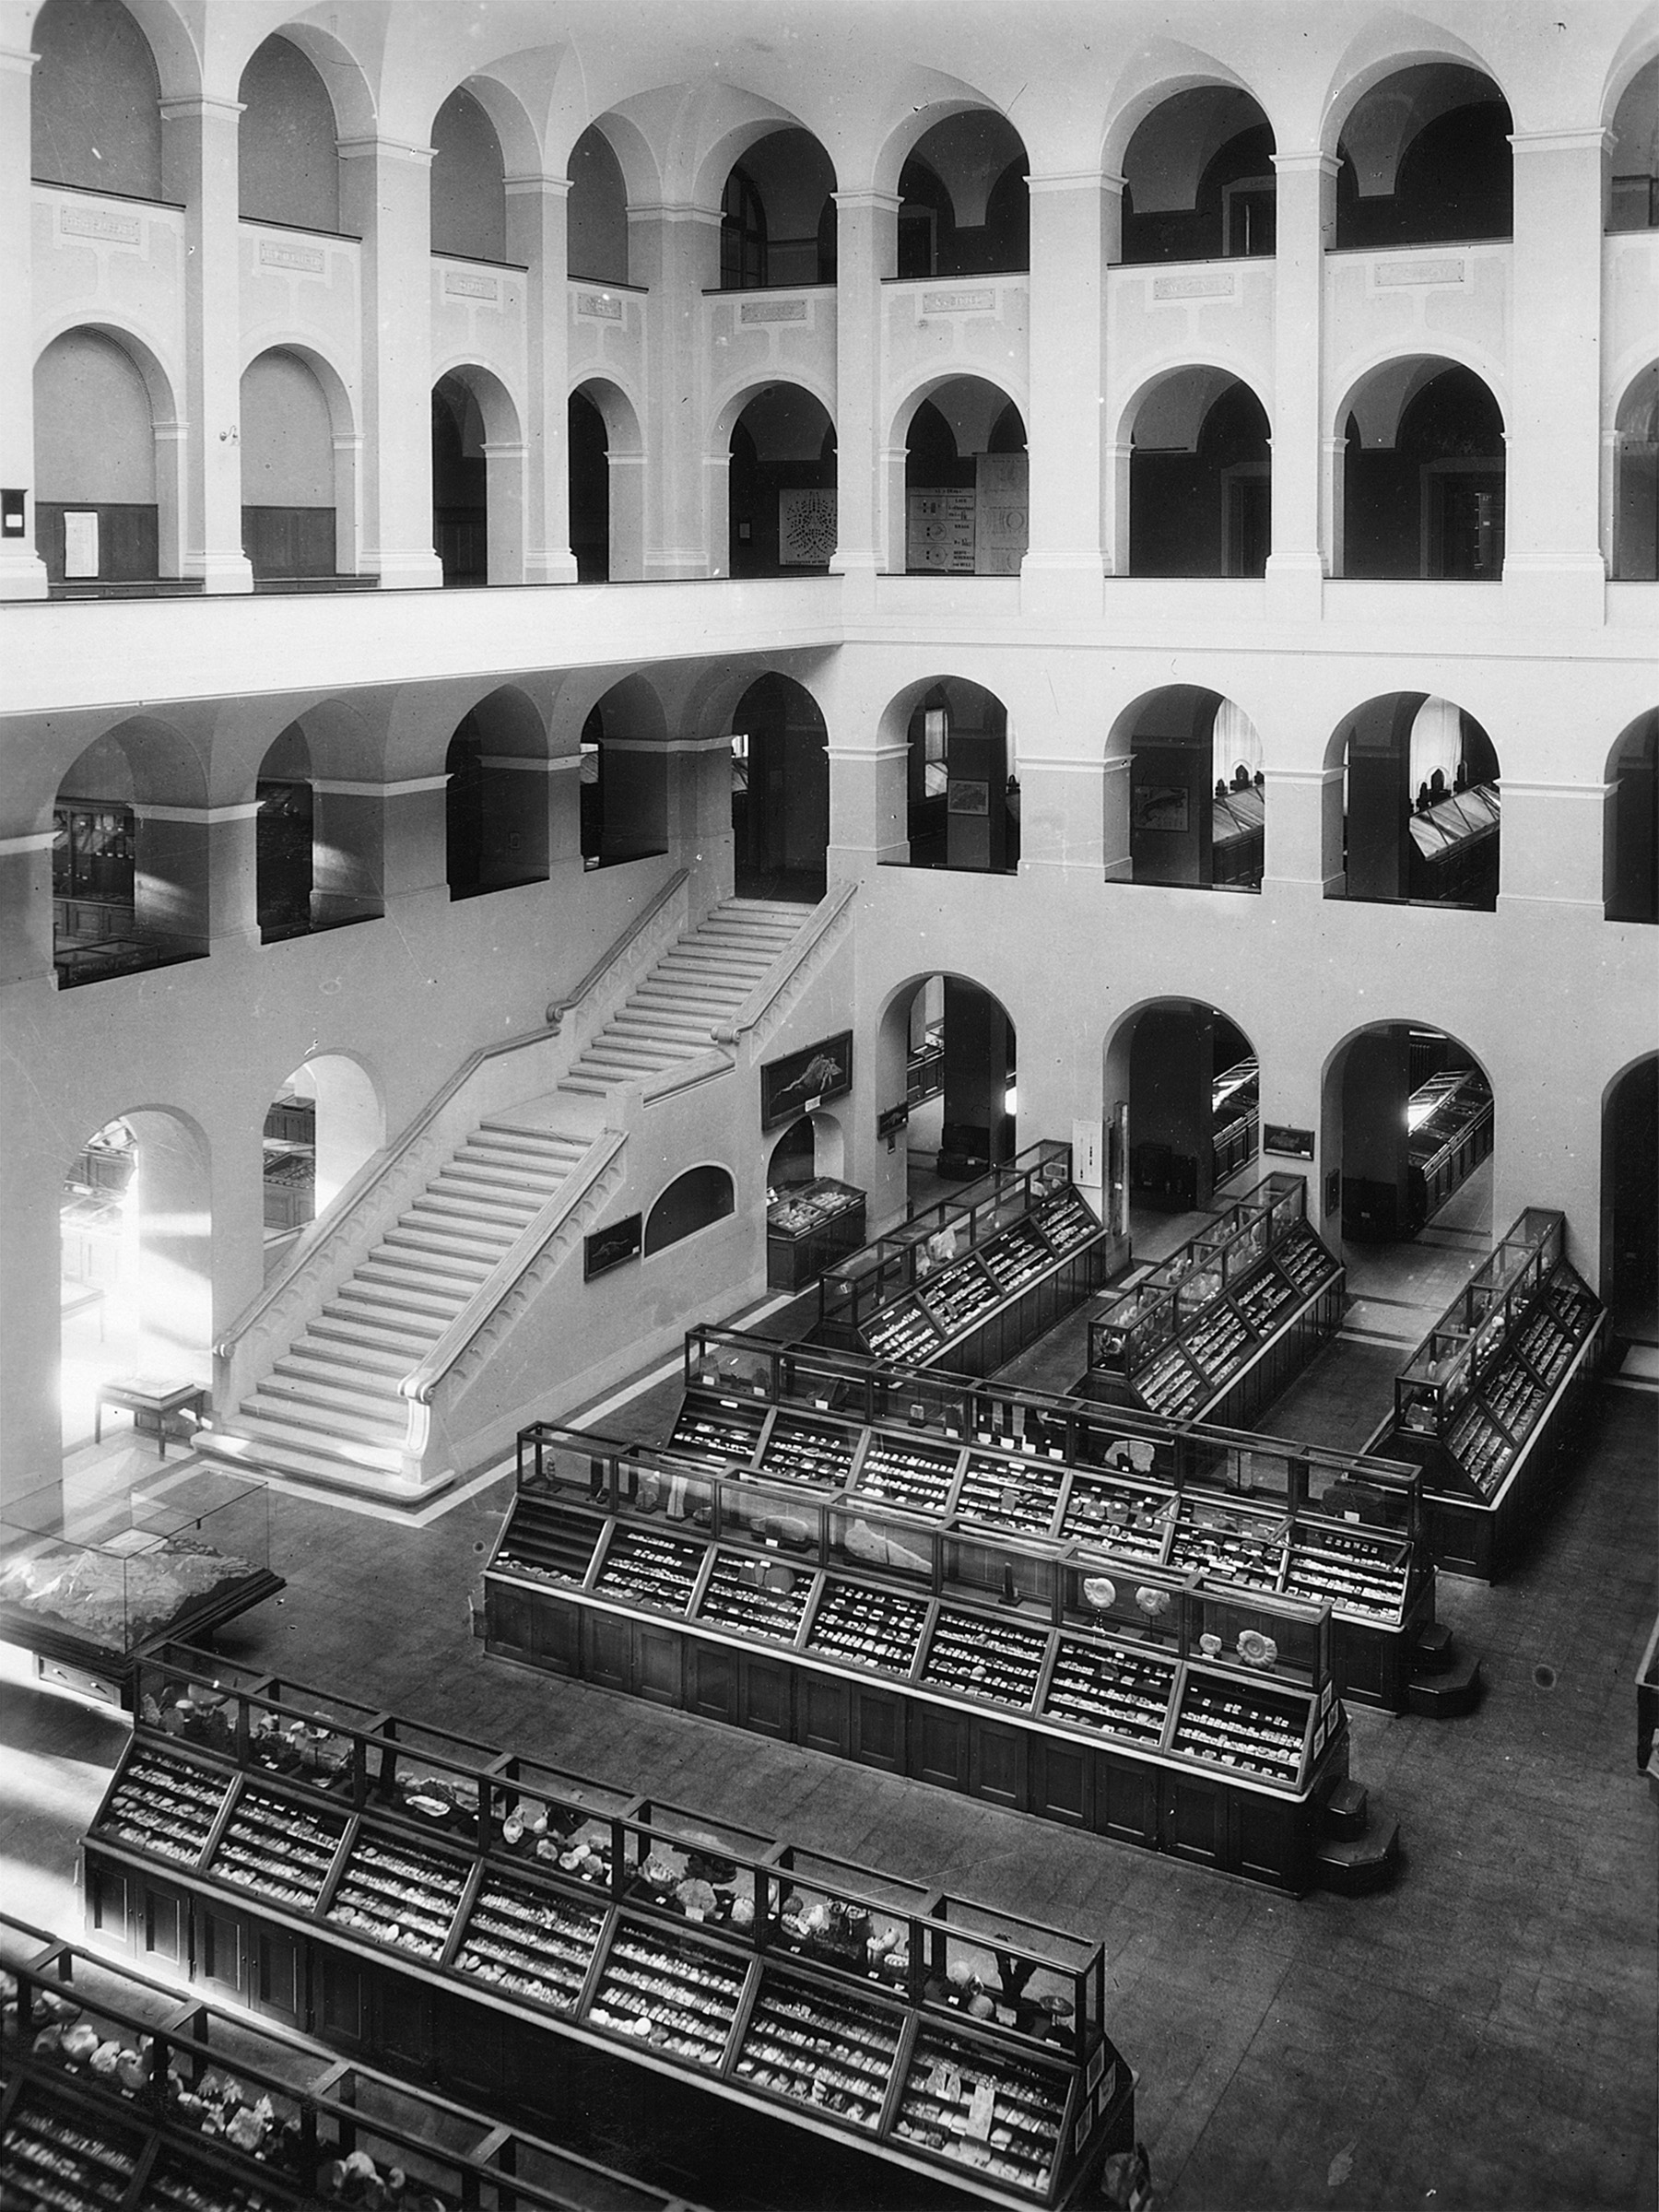 Enlarged view: Interior view of the natural sciences building east with the geological collection, around 1930